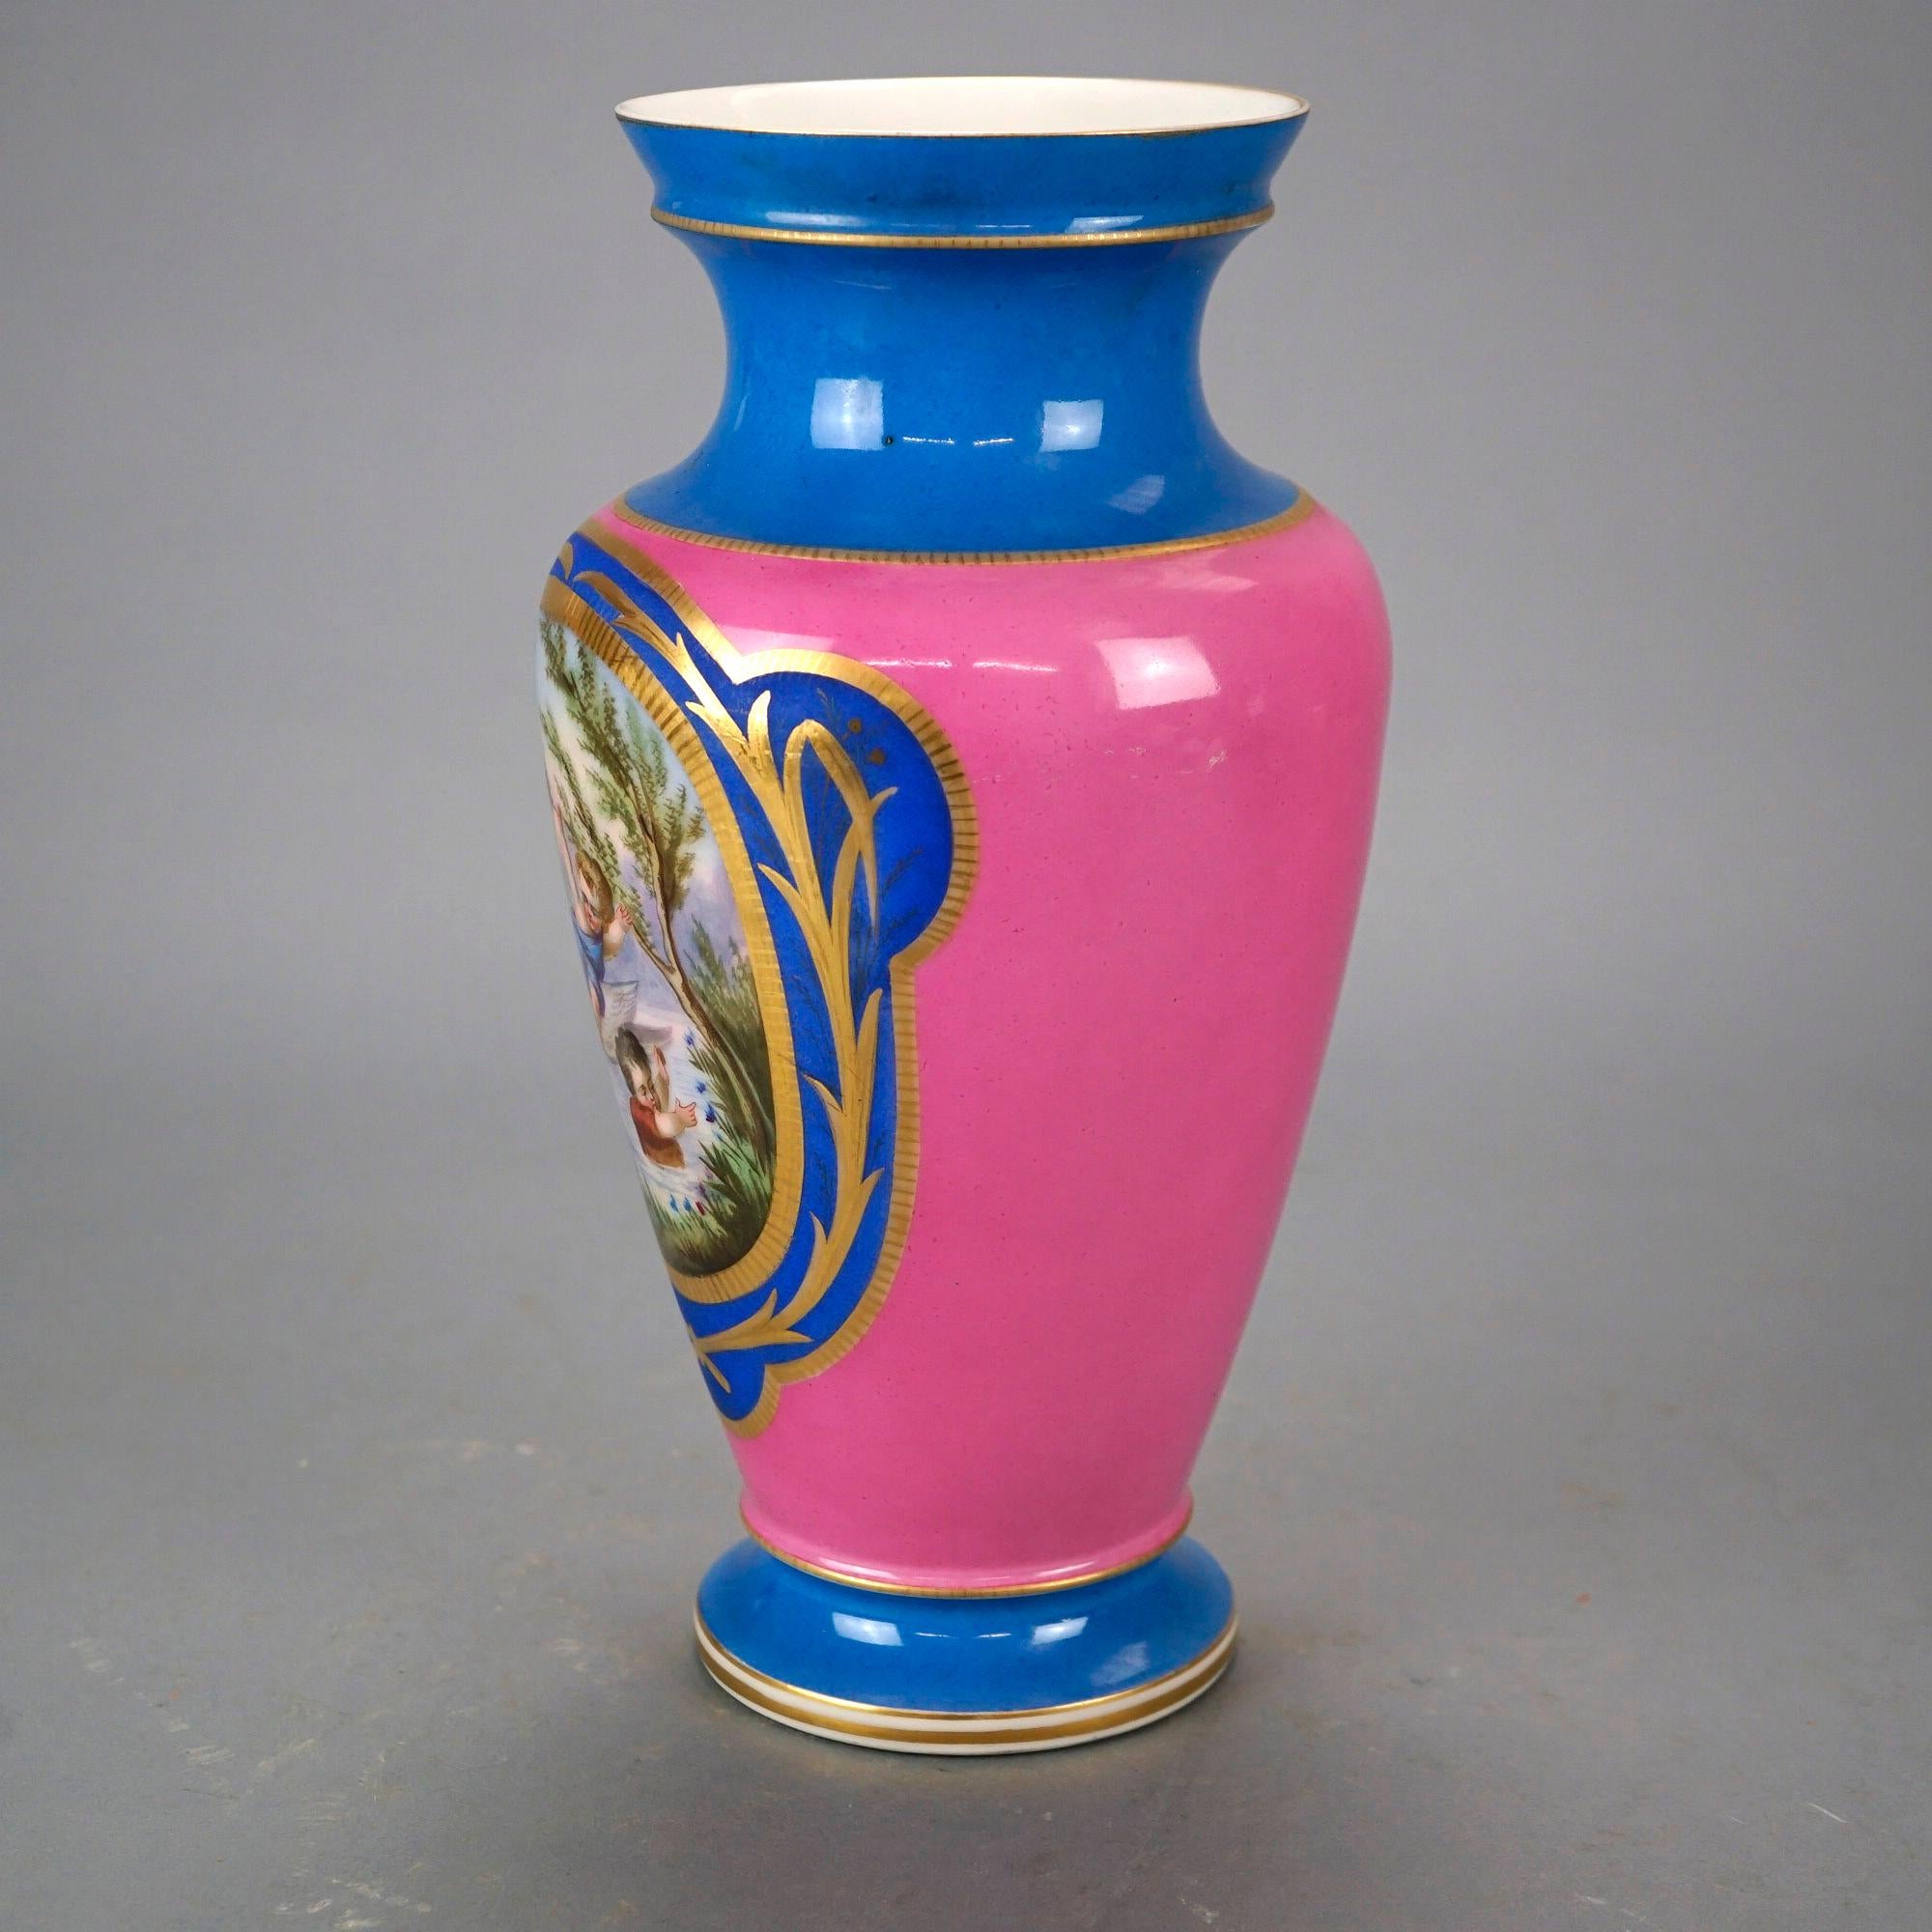 An antique French Old Paris portrait vase offers footed porcelain construction with reserve having hand painted genre scene with children on pink ground, gilt highlights throughout, 19th century

Measures- 13'' H x 6.5'' W x 6.5'' D.